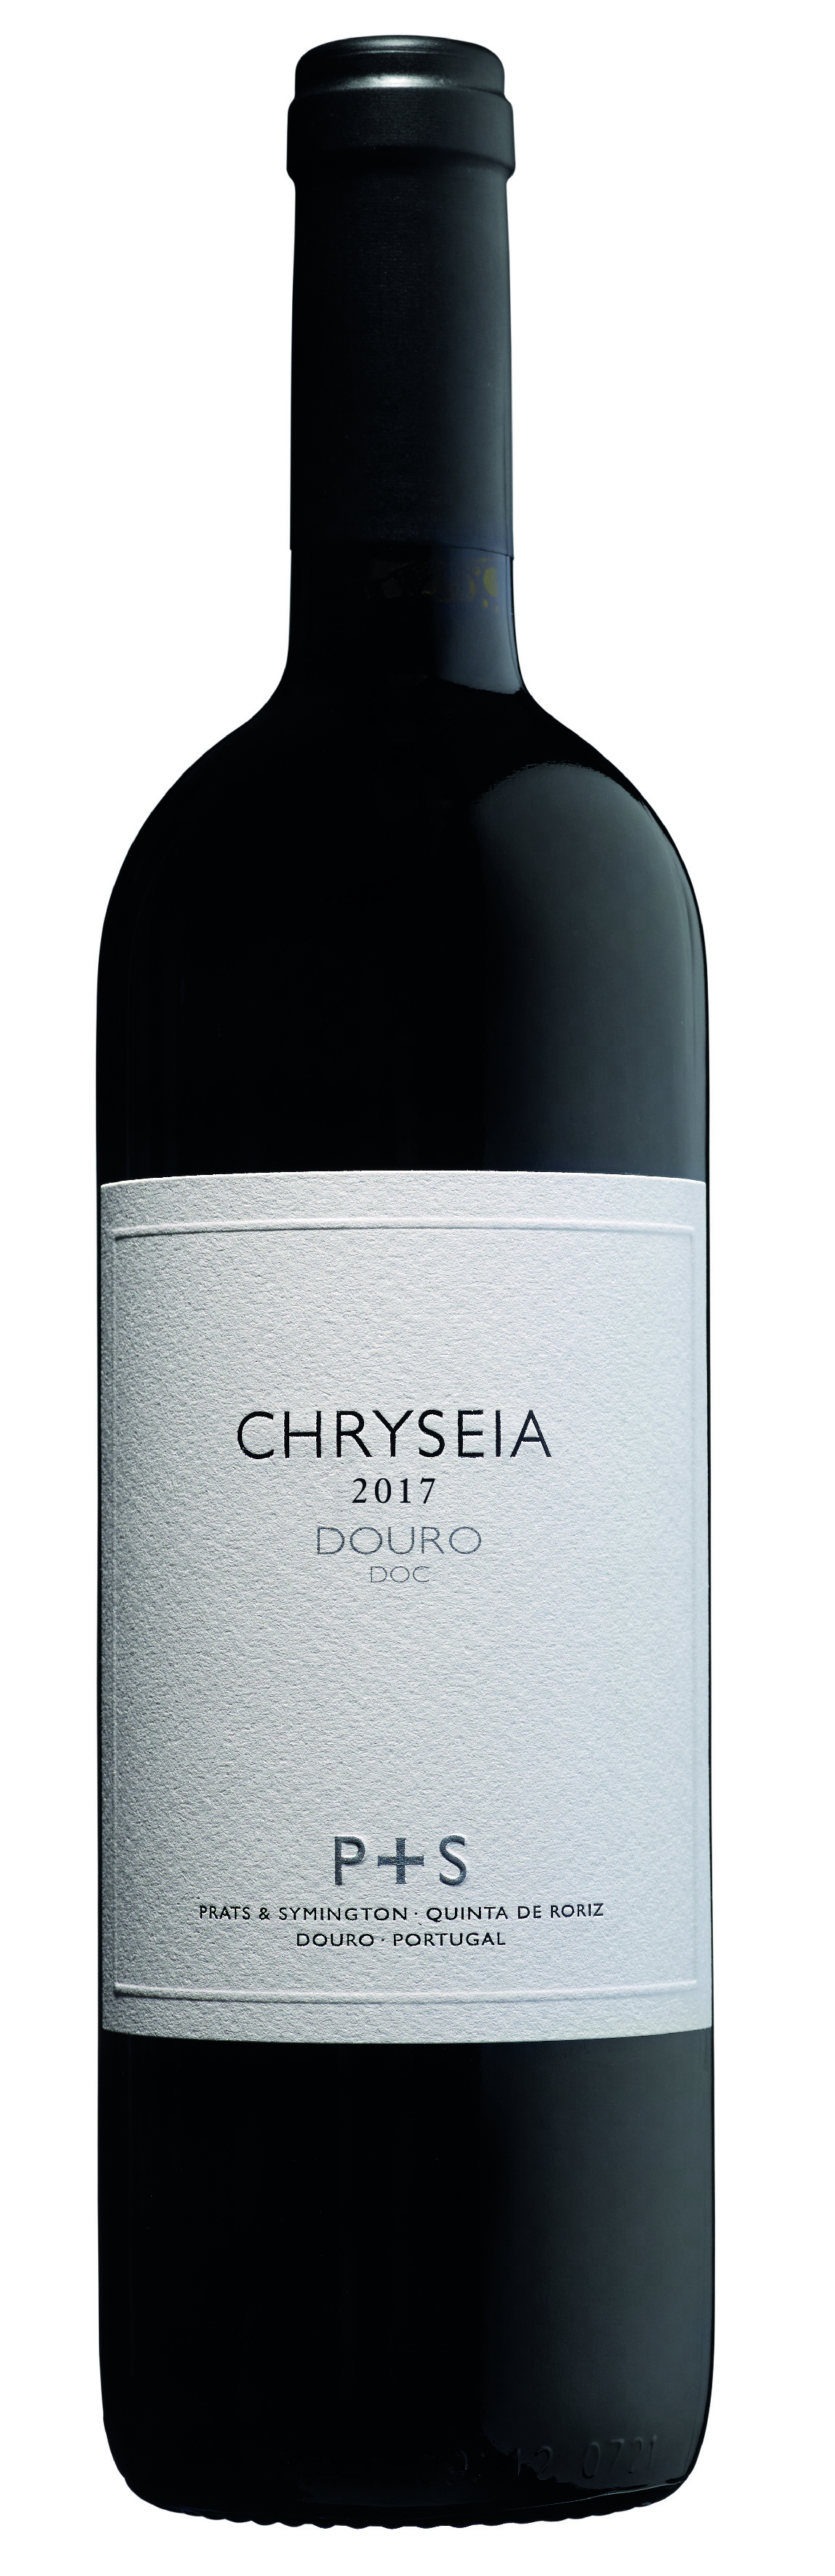 Product Image for P&S CHRYSEIA DOURO RED 2017